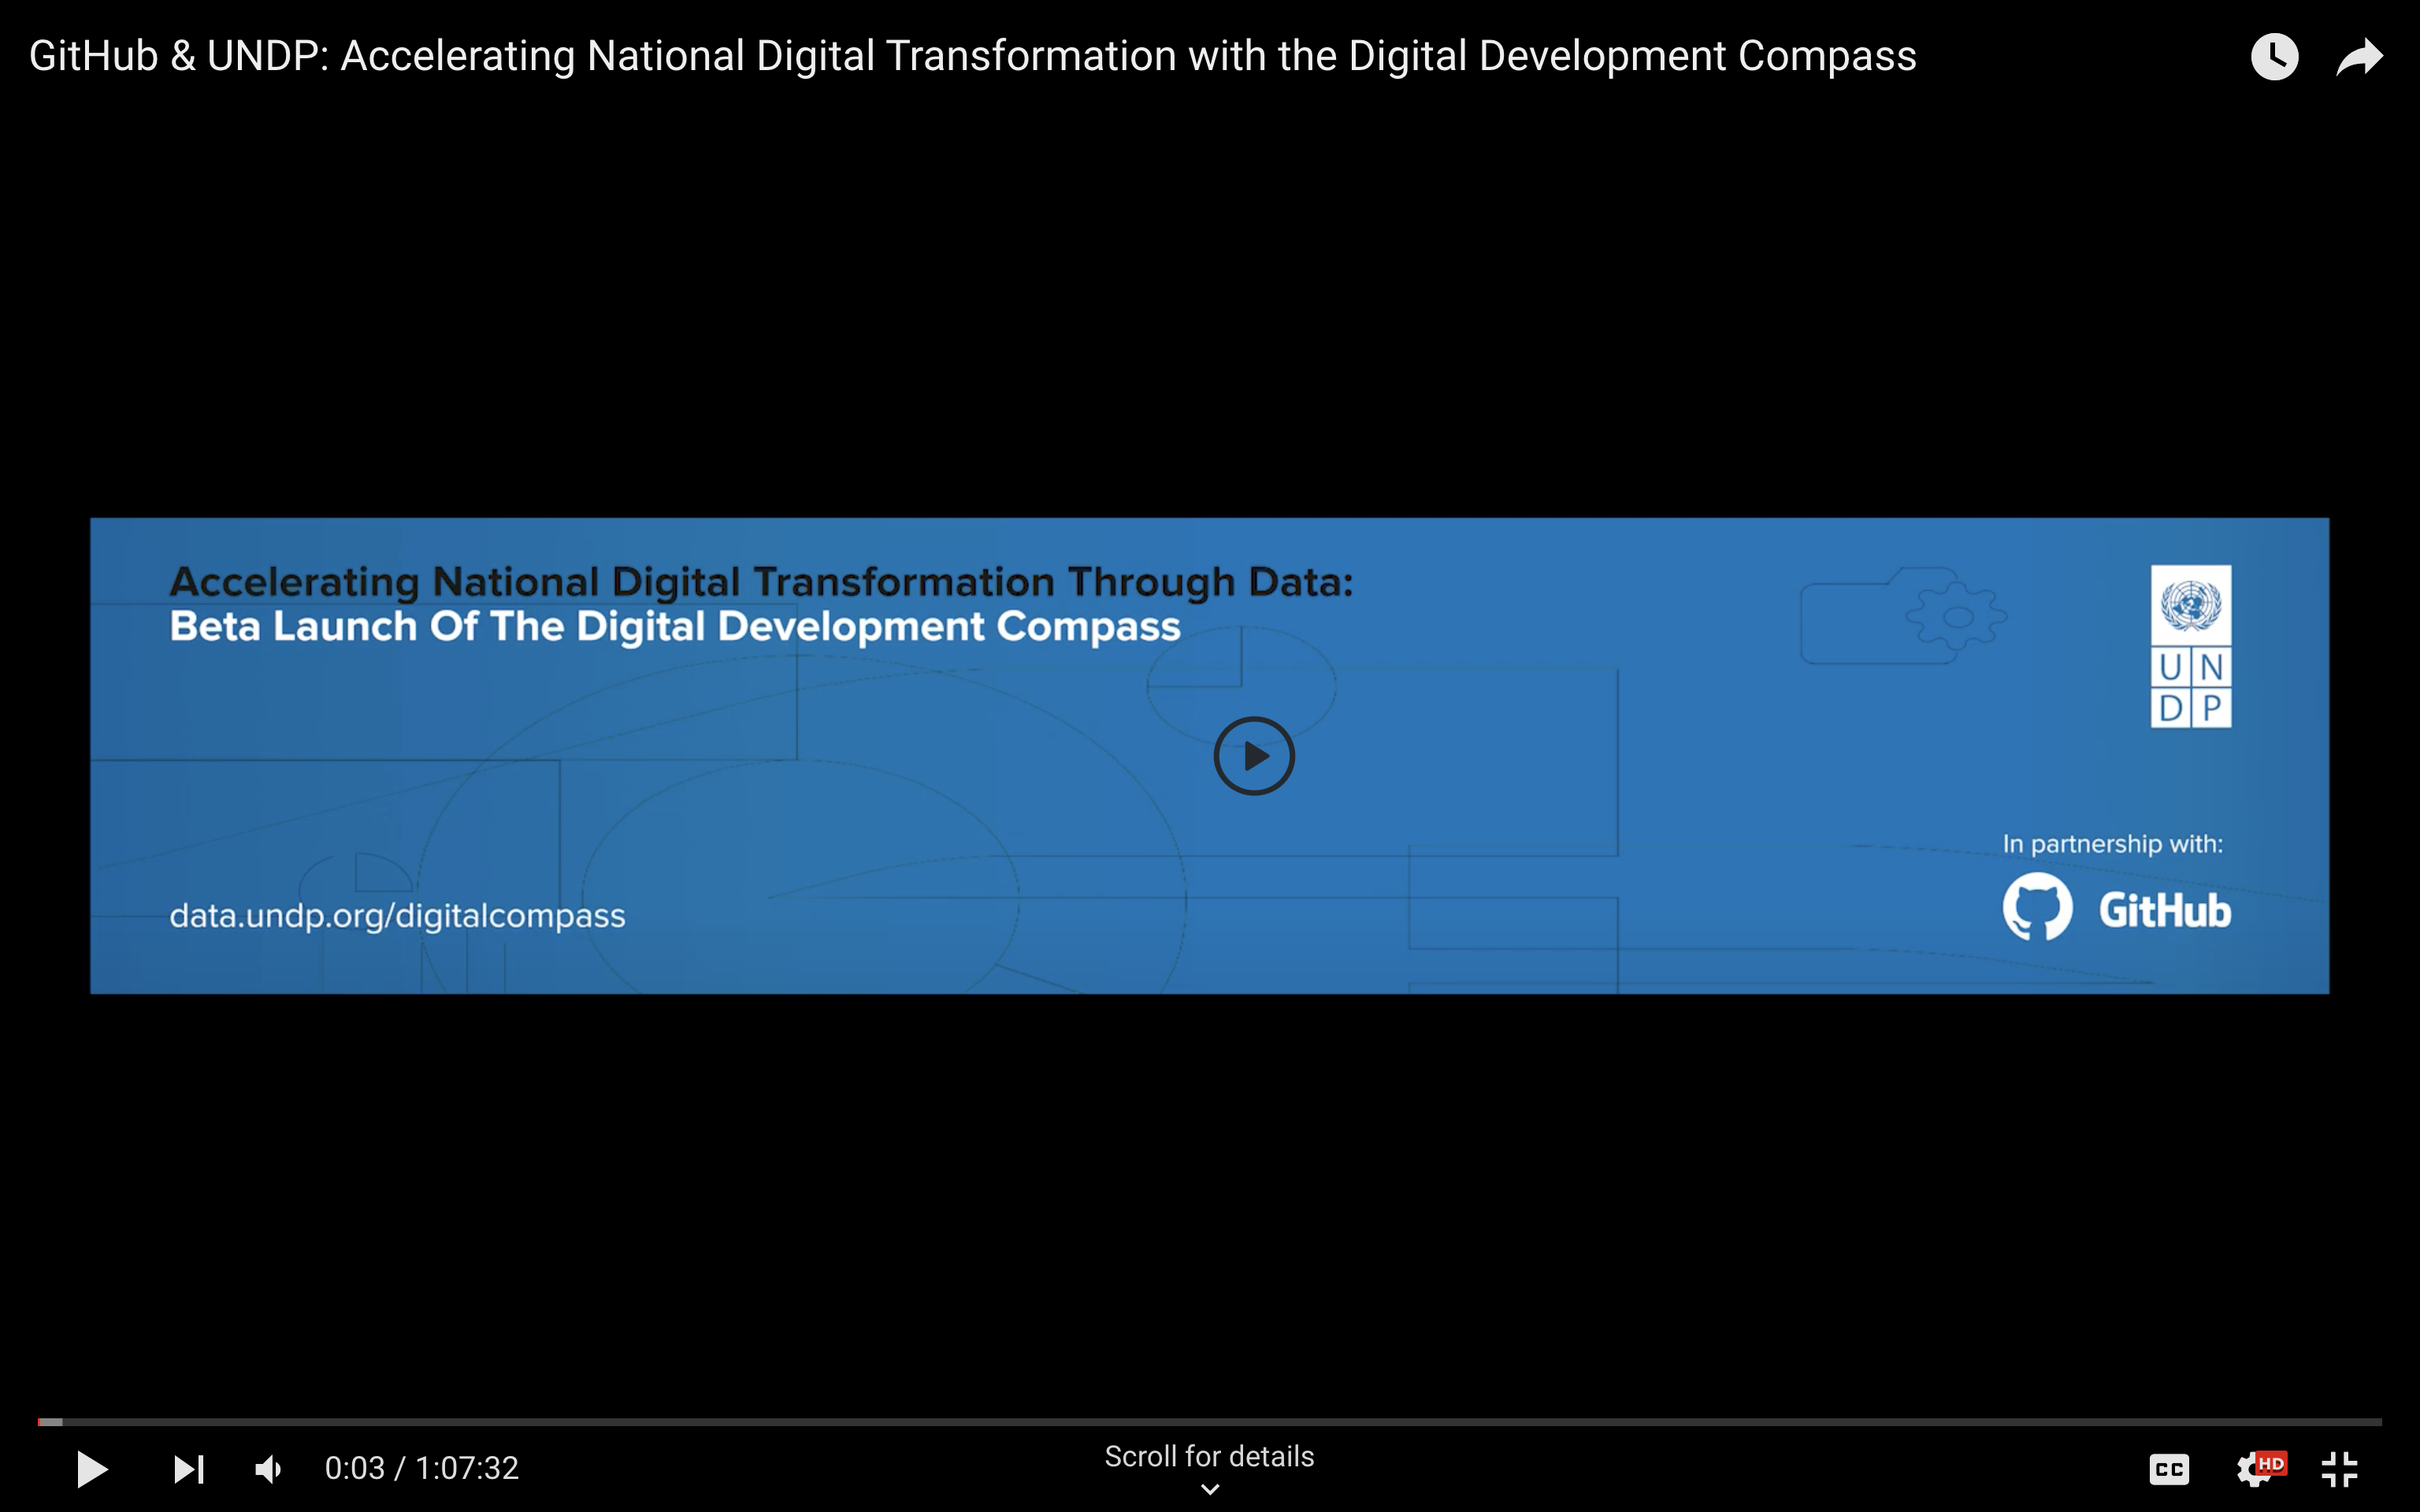 GitHub & UNDP: Accelerating National Digital Transformation with the Digital Development Compass